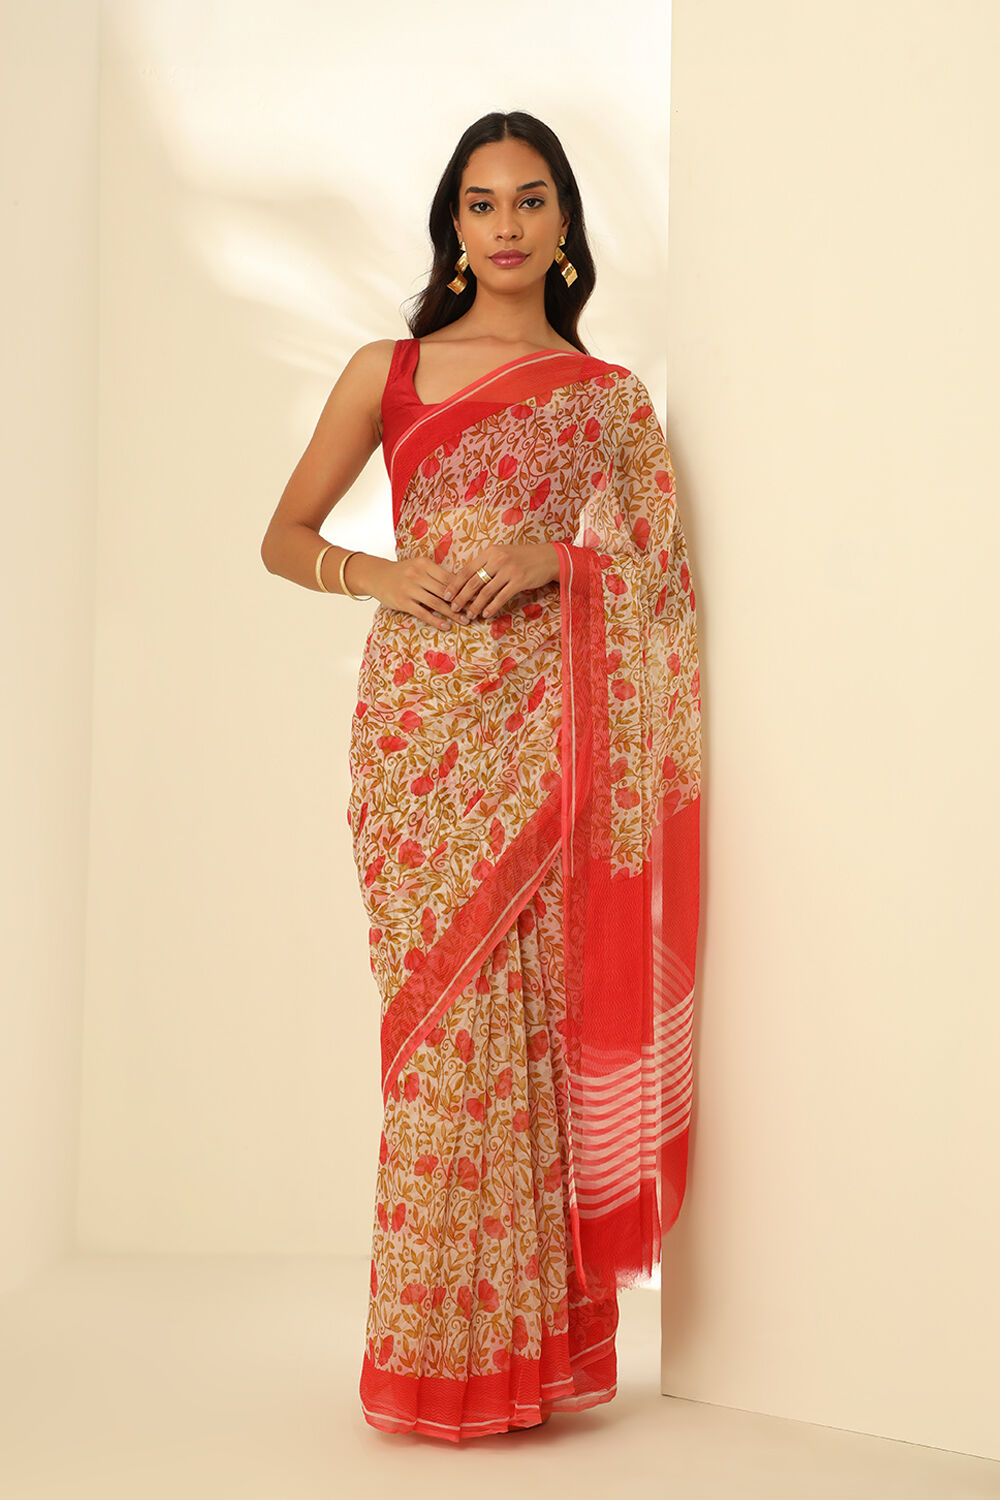 Saree Sale Online - Buy Sarees with Amazing Offers on Taneira